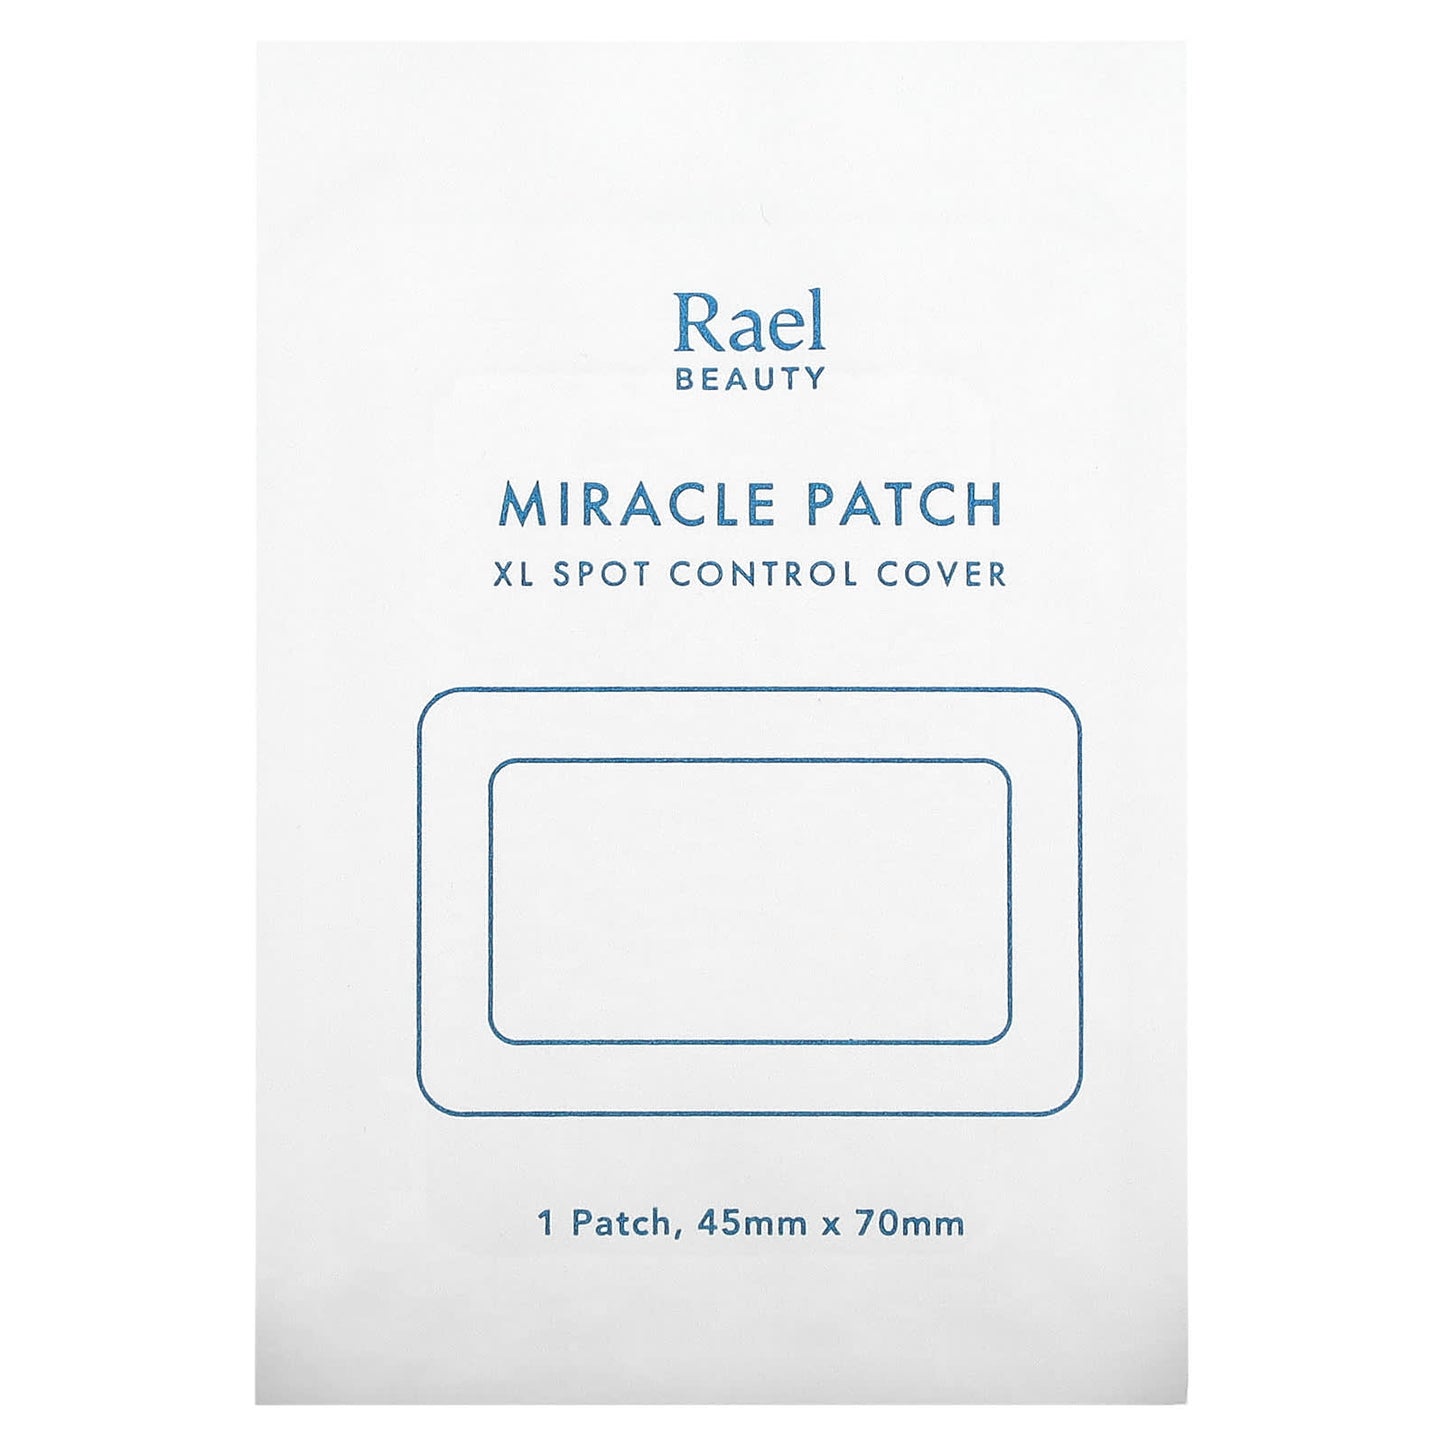 Rael, Beauty, Miracle Patch, XL Spot Control Cover, 6 Patches